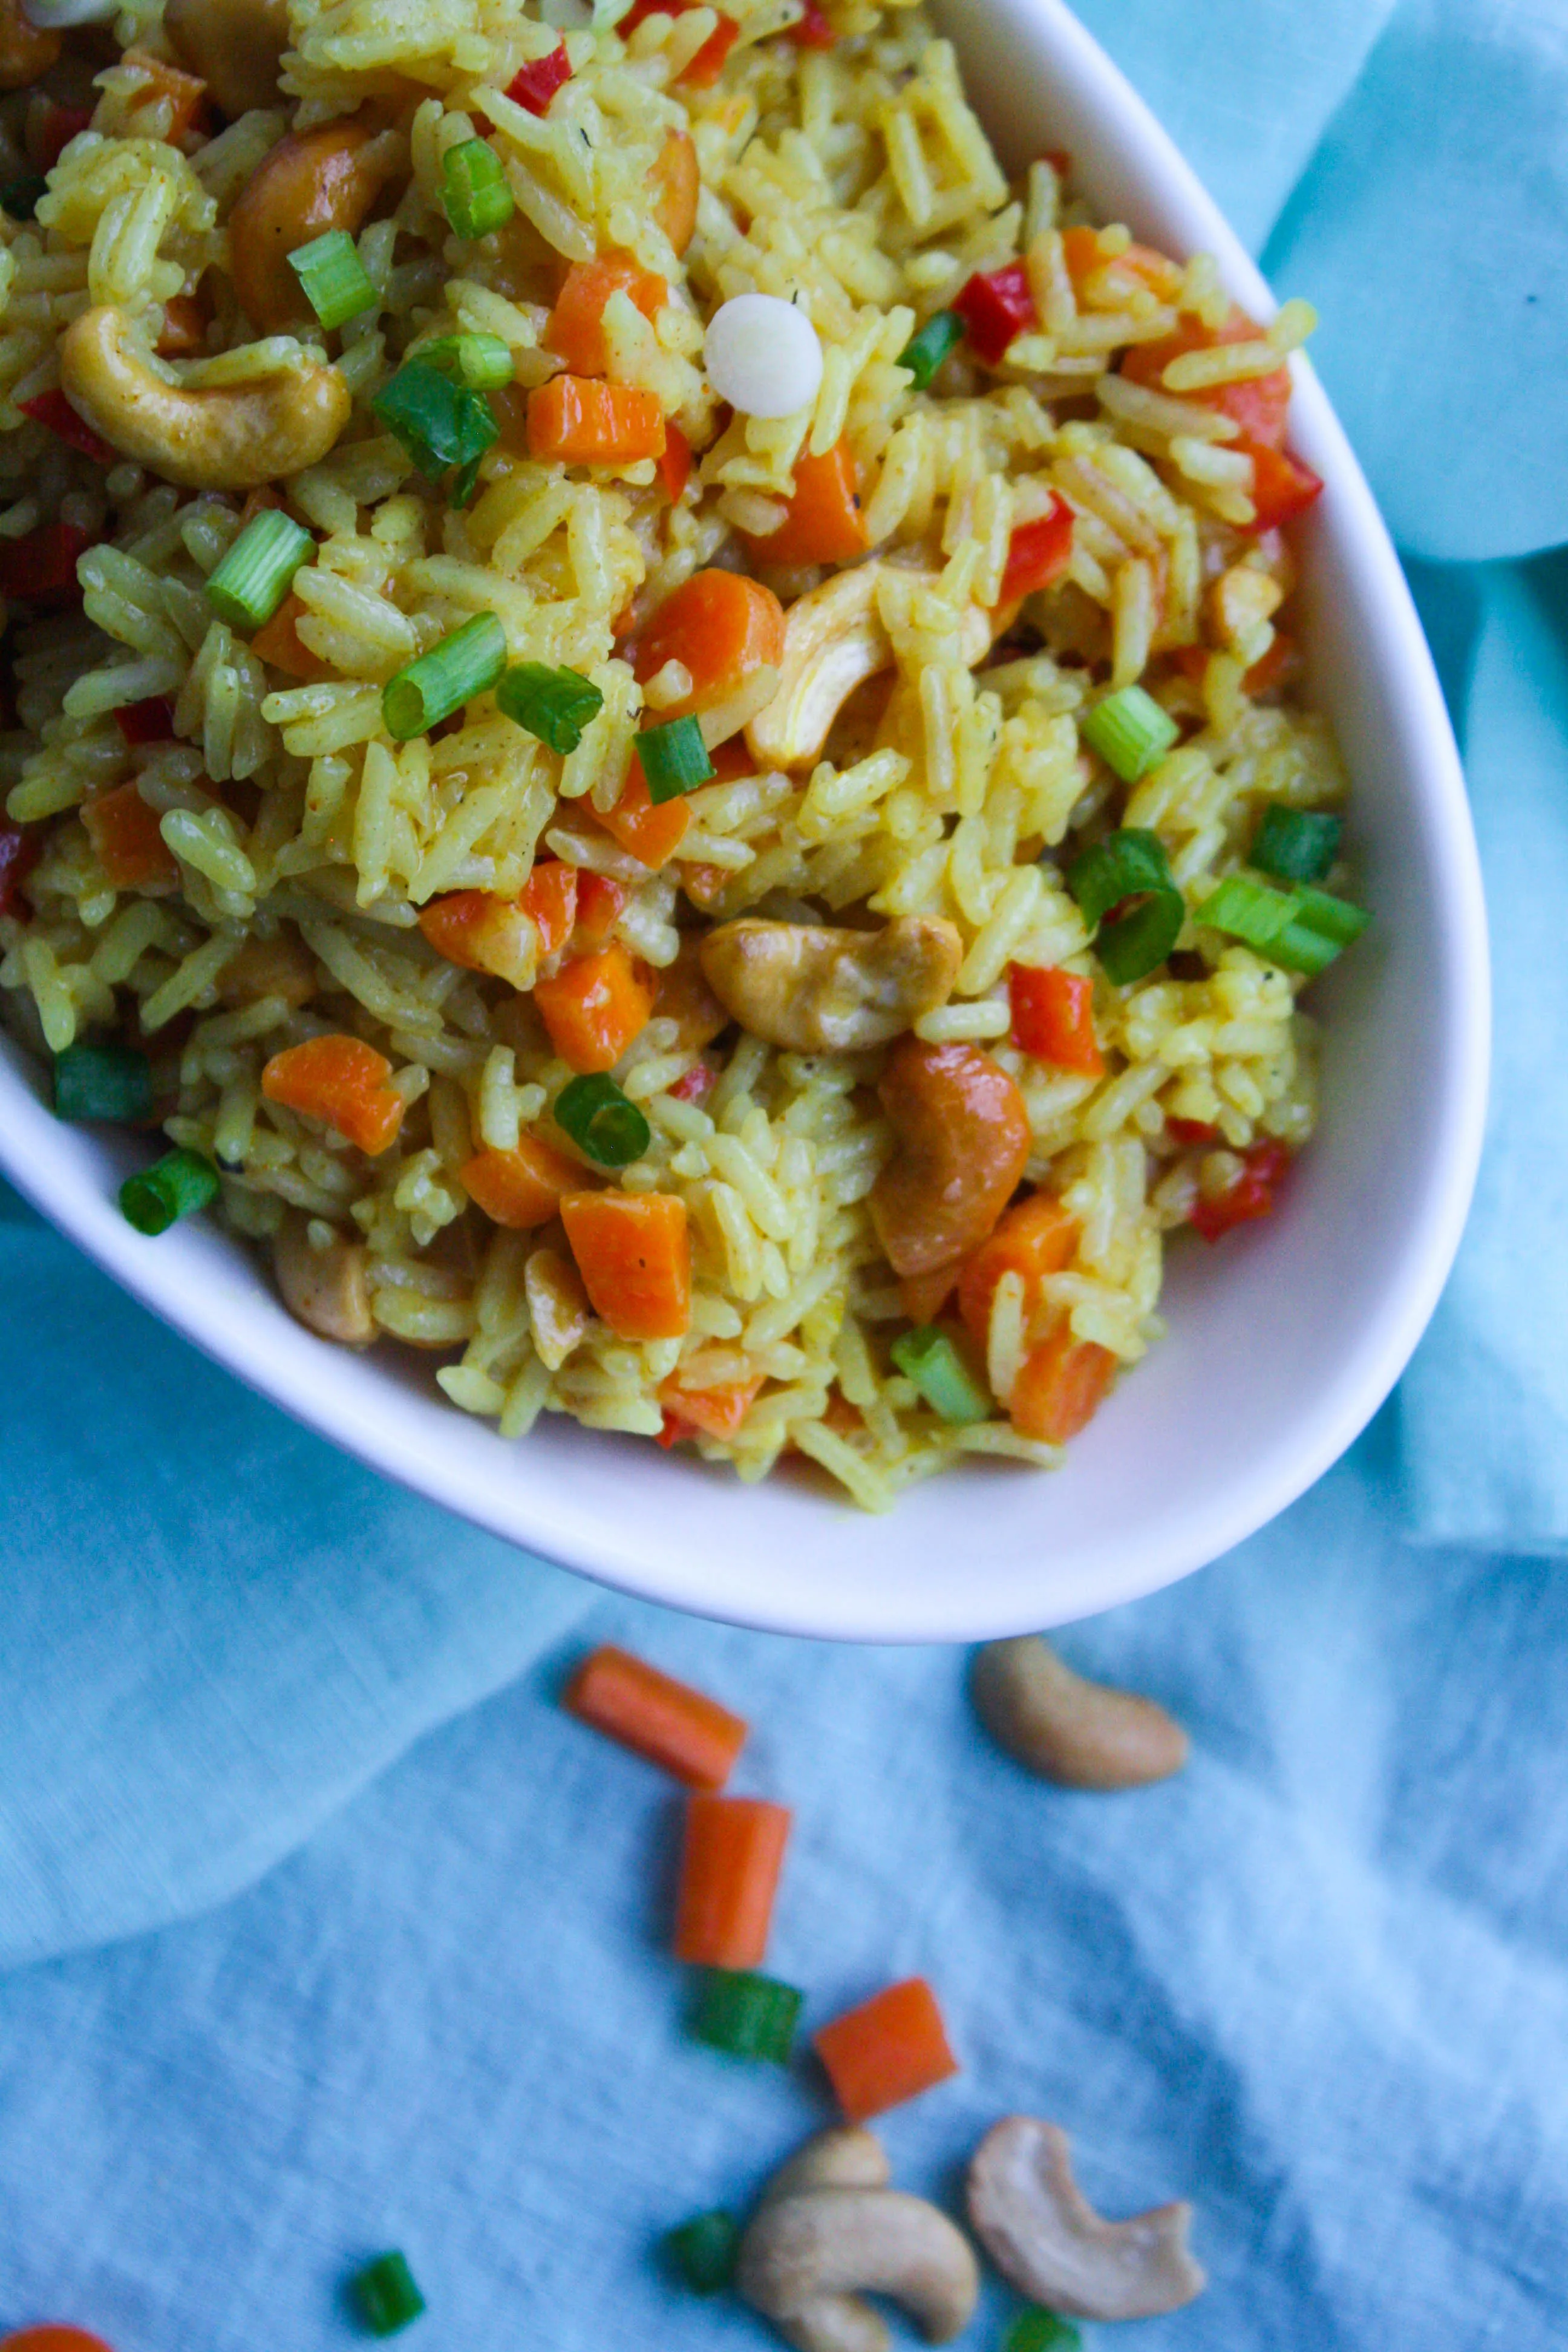 Coconut Carrot and Cashew Rice Pilaf is a fabulous and flavorful side dish. You'll love how easy this rice pilaf is to make, too!